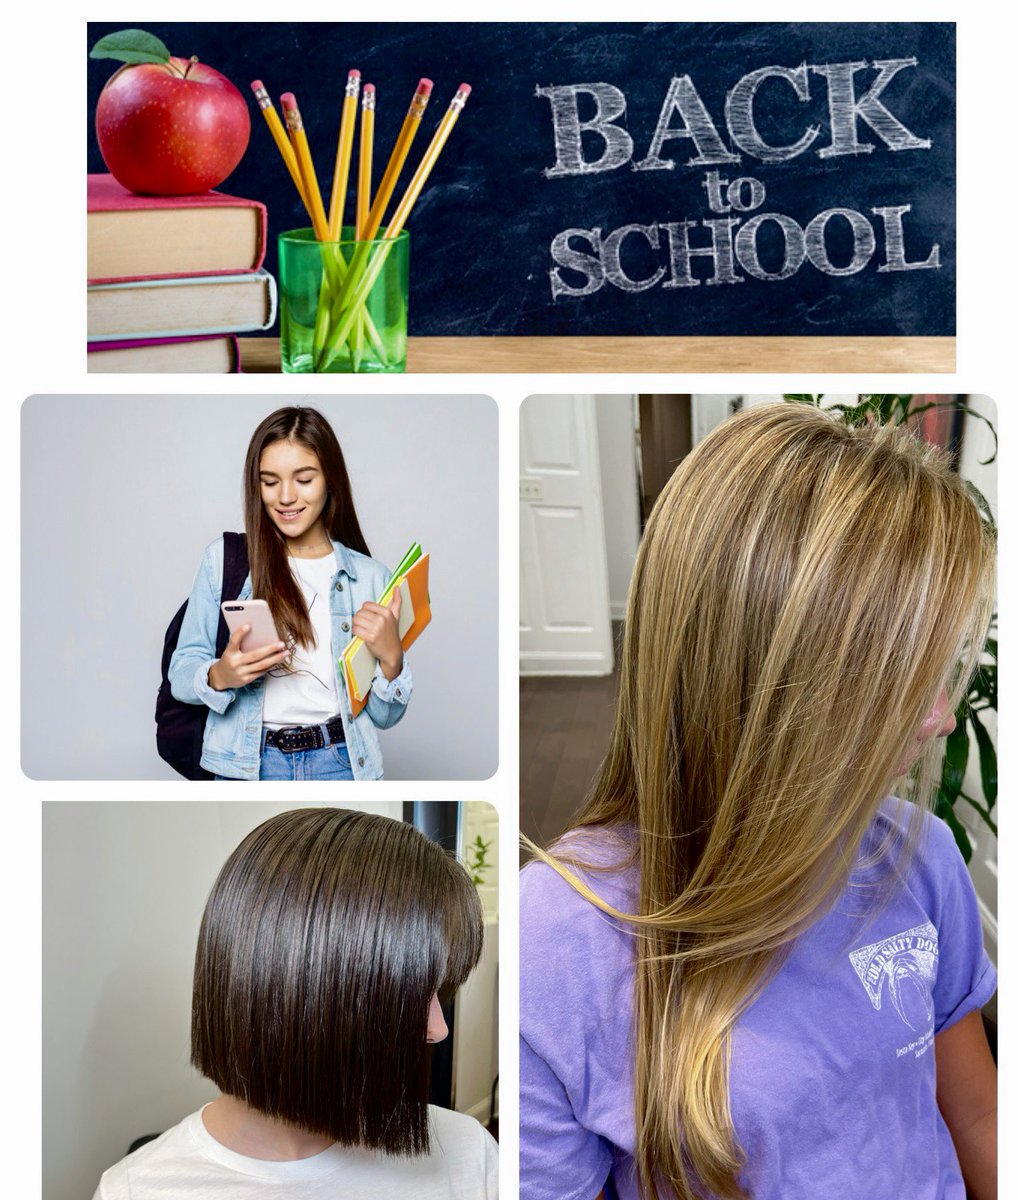 ✂️✨ Time for a fresh start! Whether you're rocking kindergarten or ruling high school, a fantastic haircut can boost your confidence! 💇‍♂️💇‍♀️ Get back-to-school ready with the coolest,  haircuts and styles. Book your appointment today (908)598-1000 📲 #esperanzasalon #summitsalon